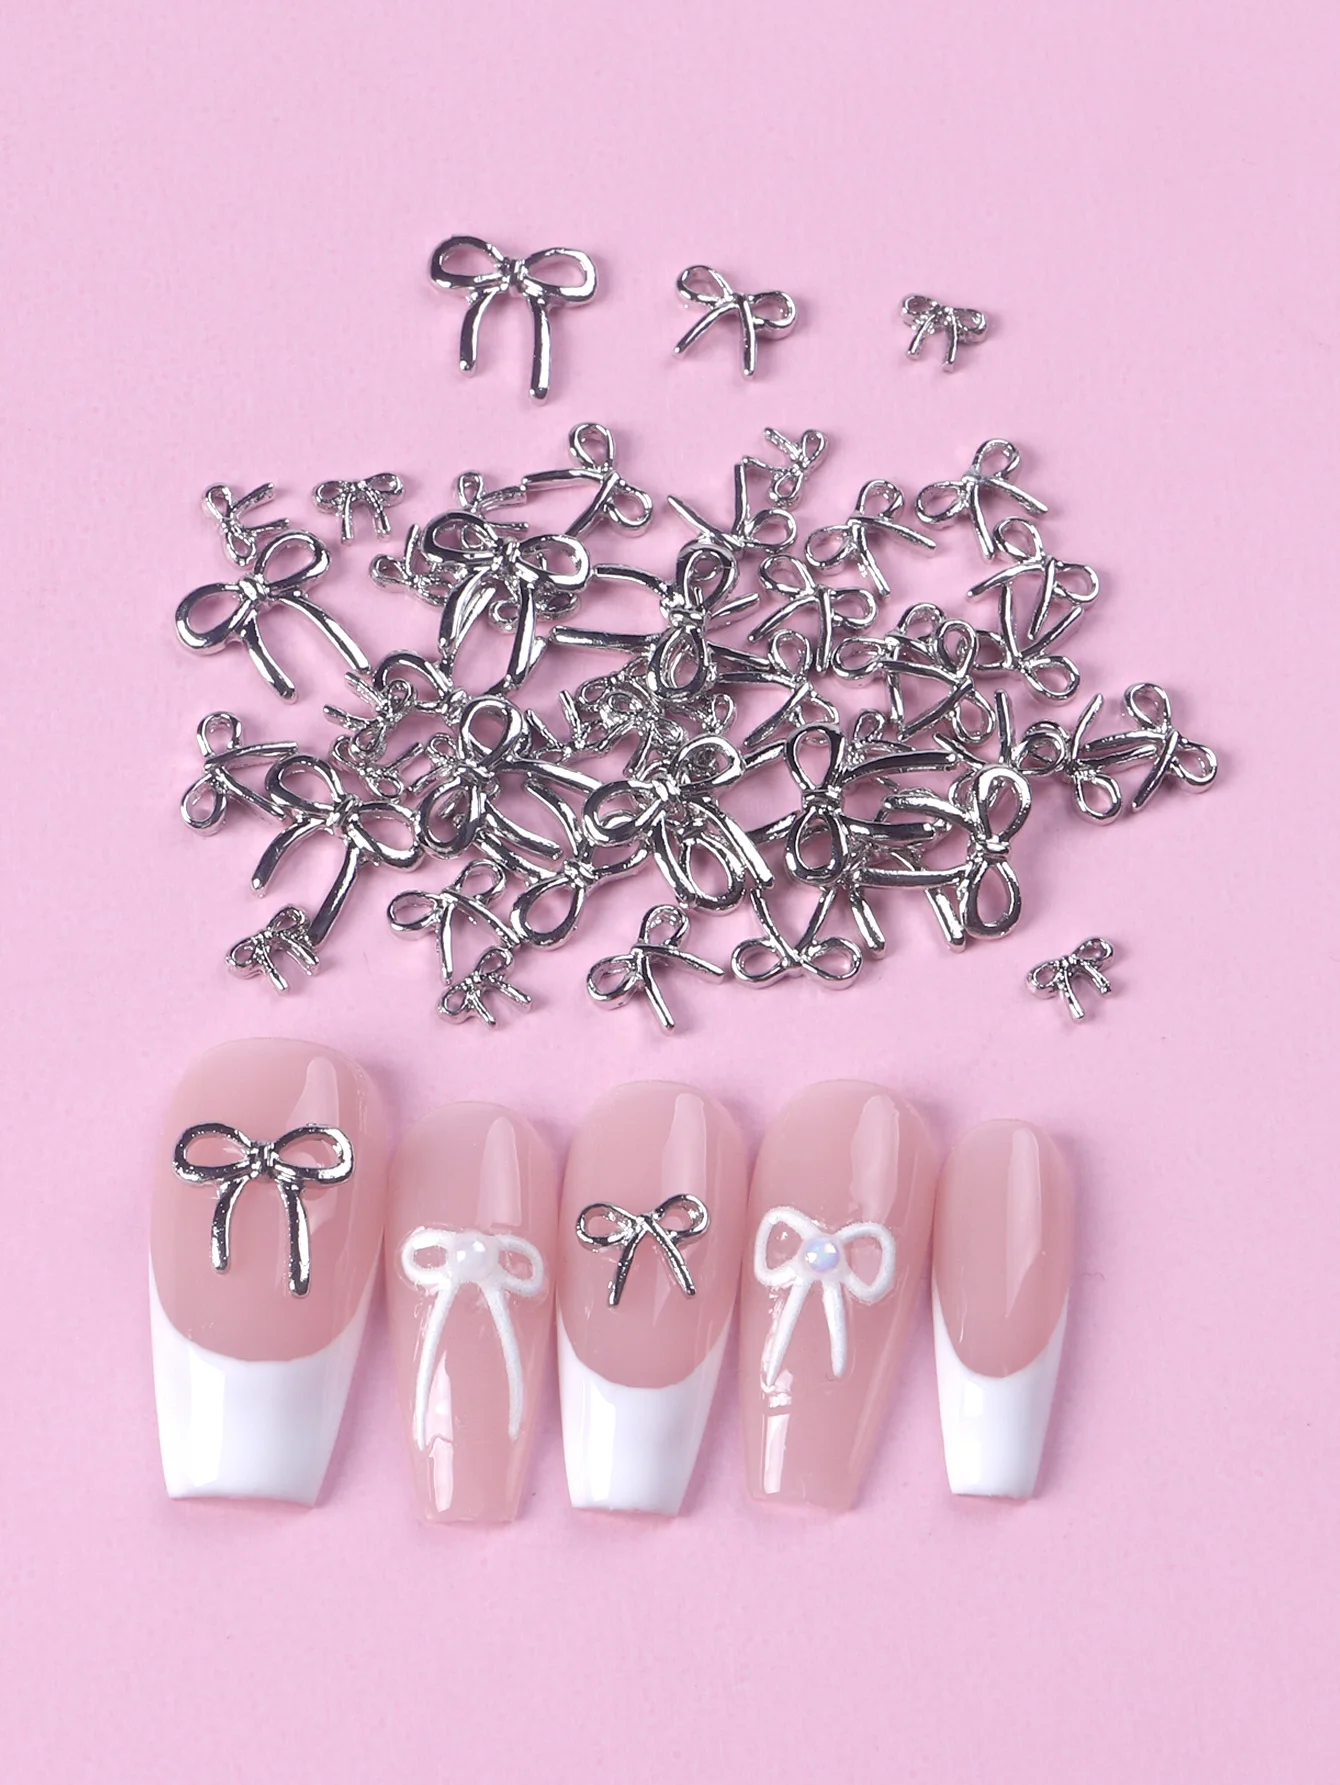 50PCS Mix Size 3D Grey Bowknot Shaped Nail Charms Metal bow Nail Art Manicure Jewelry For DIY Nail Accessories